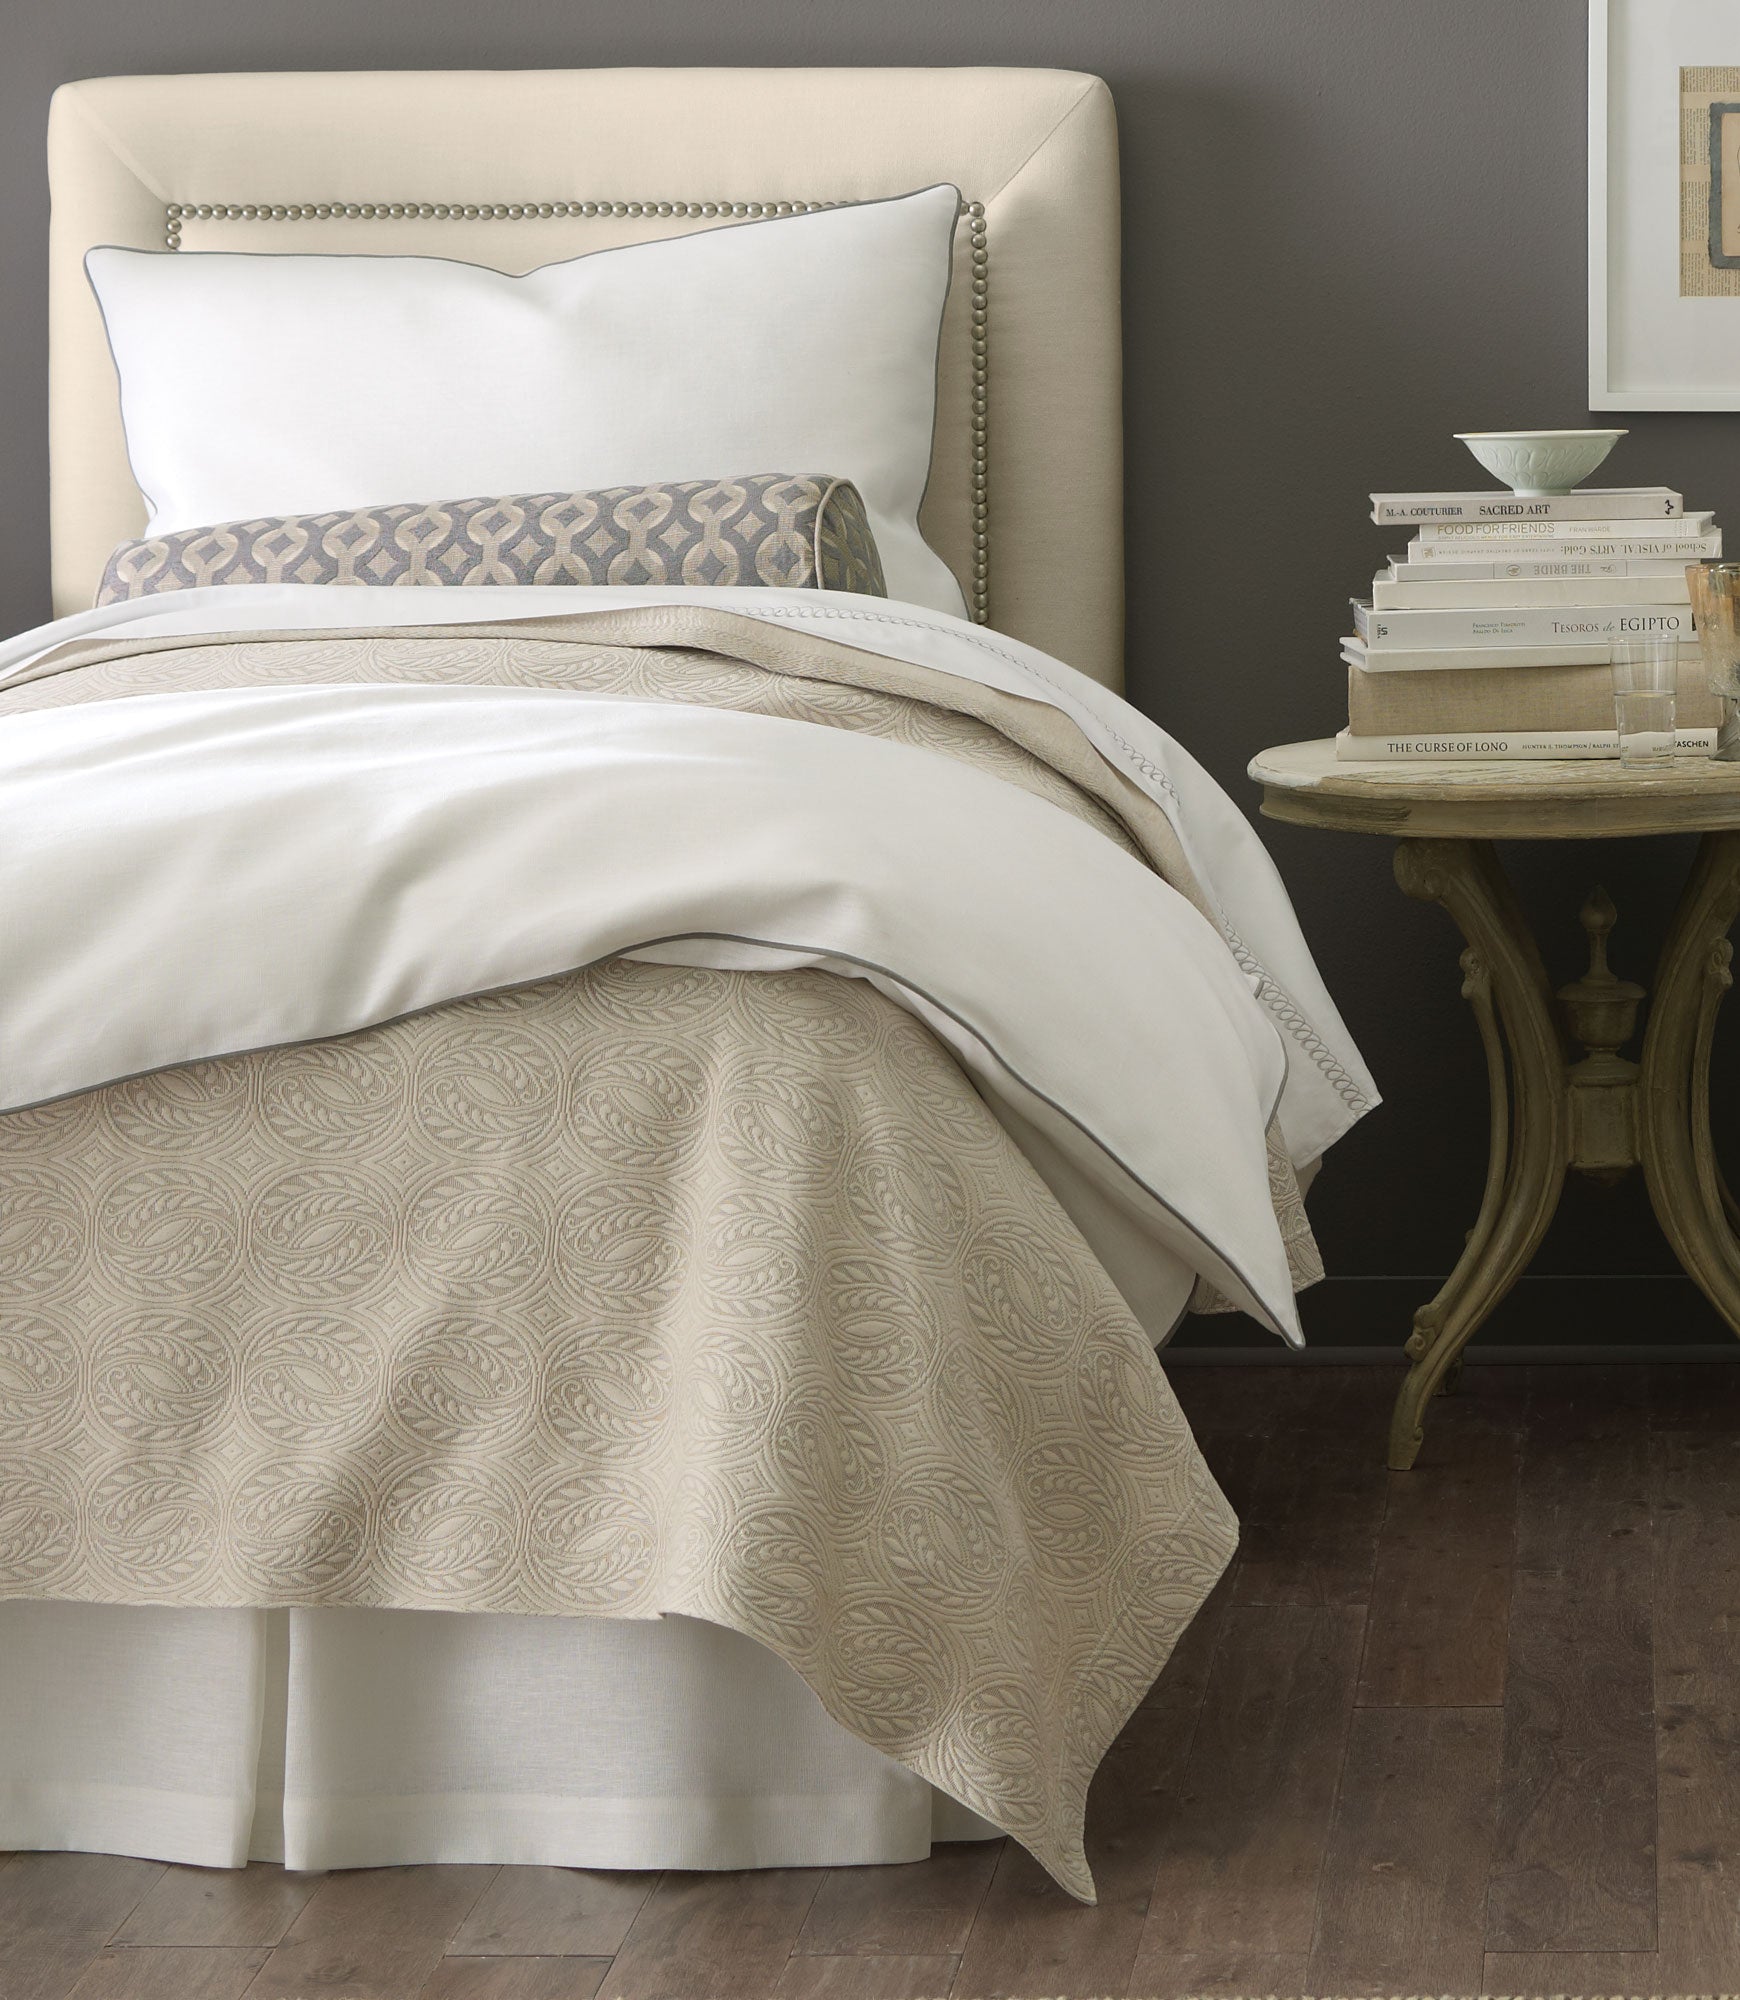 4 Tips to Choosing the Right Bed Skirt